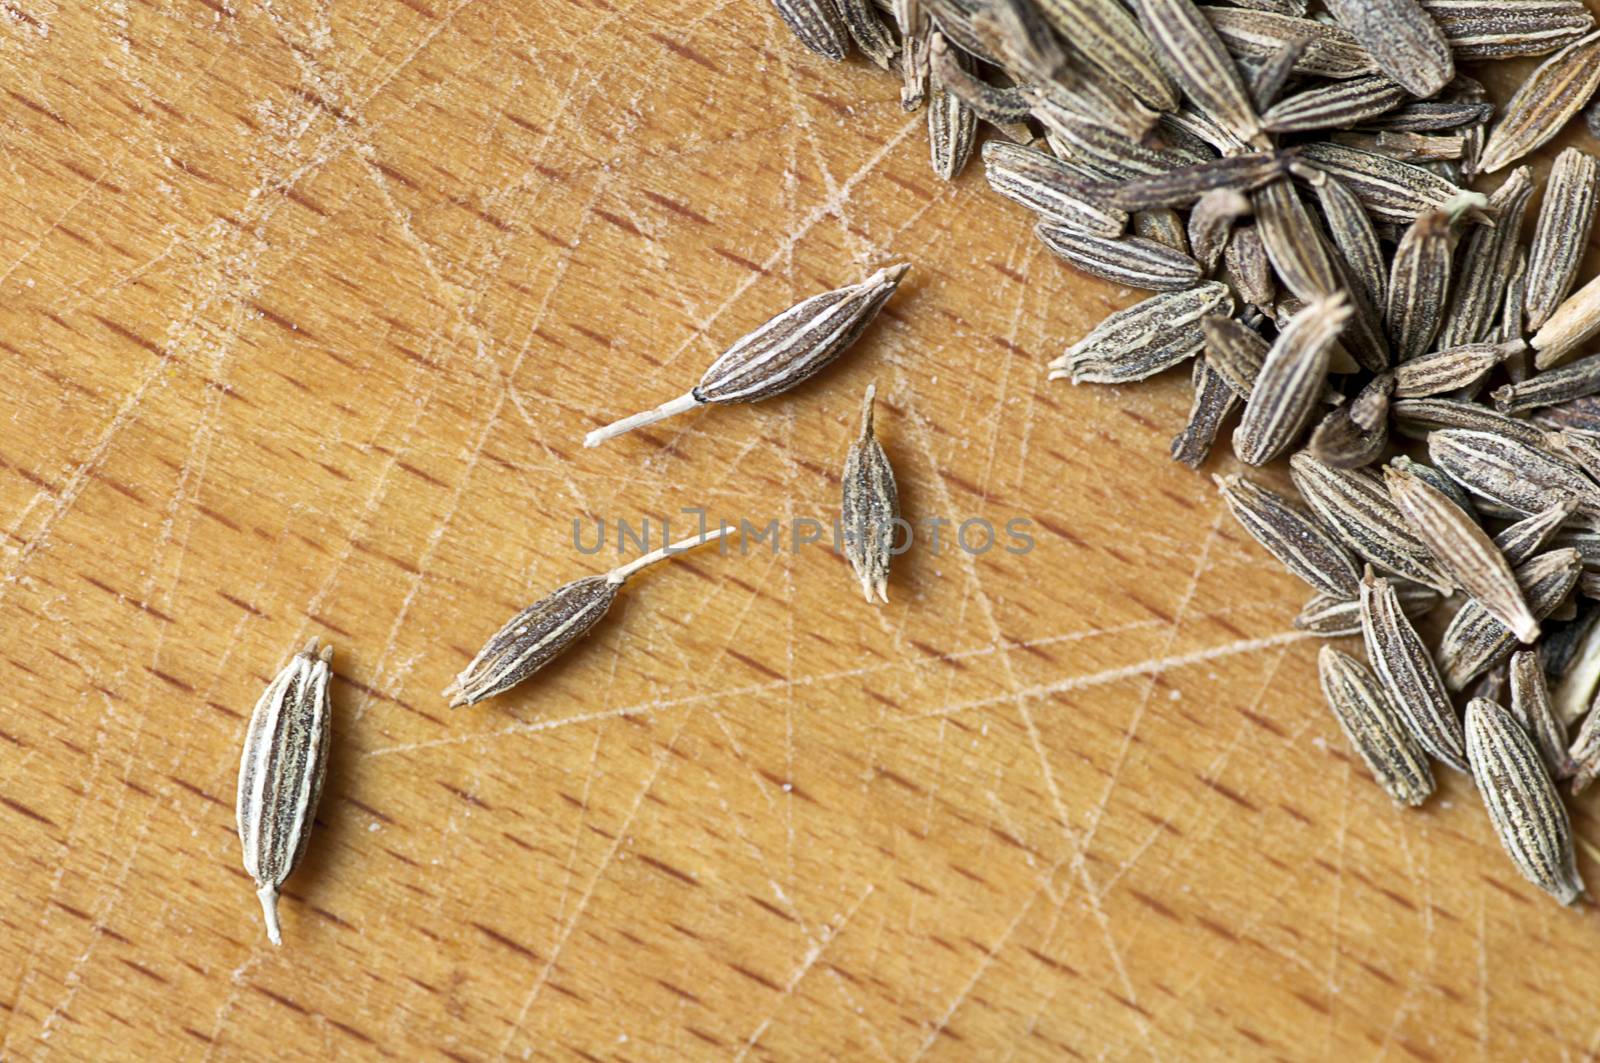 Cumin seeds by dred